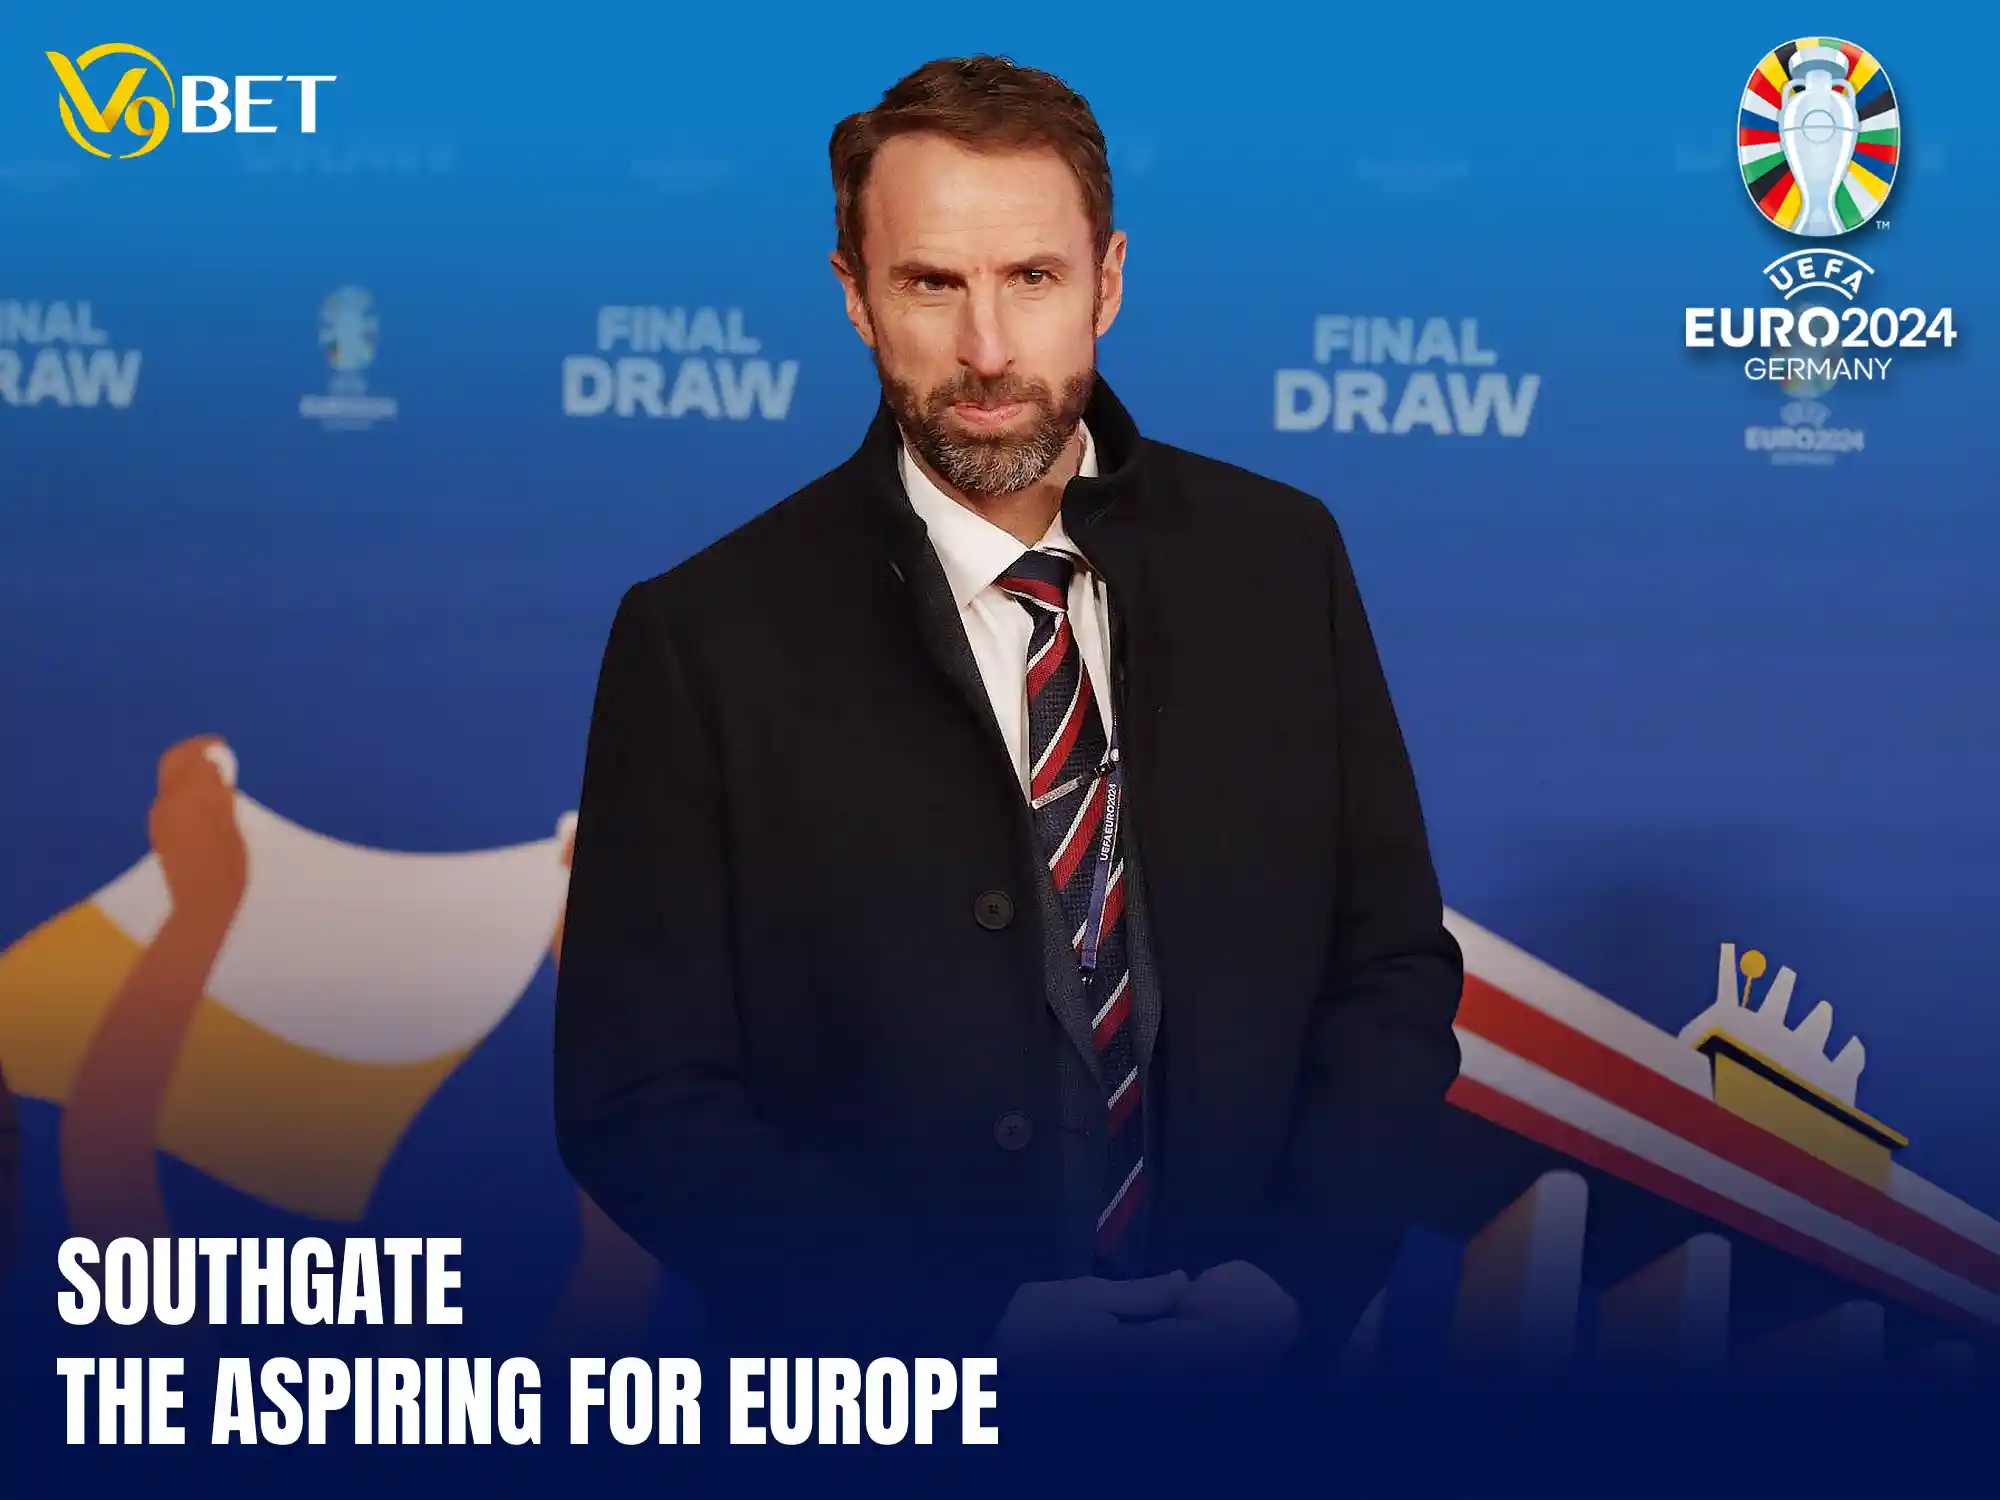 The whole of Europe is aspiring to be like Southgate